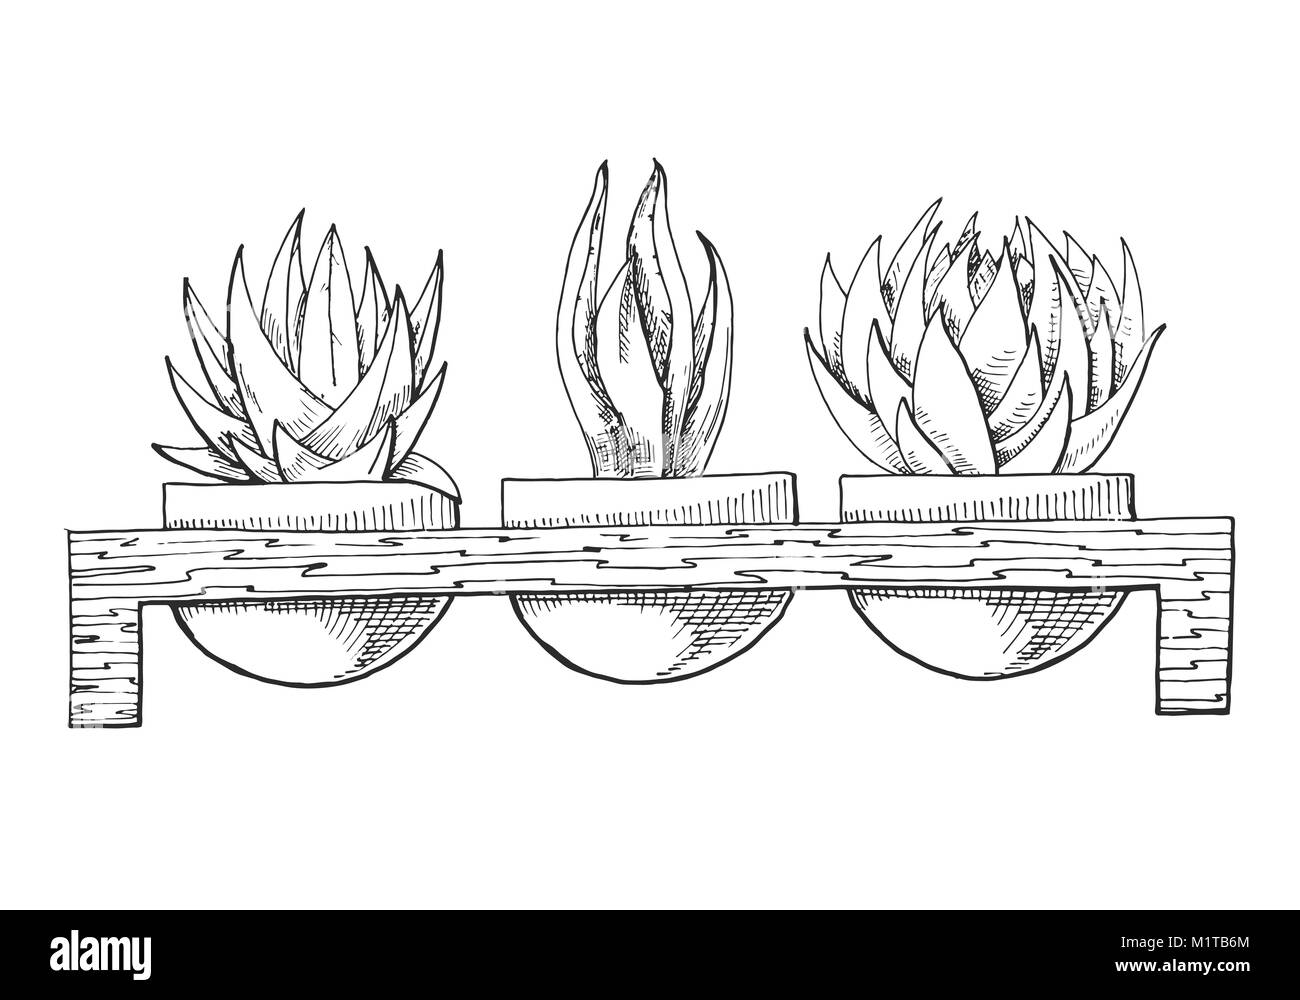 Sketch of three succulents in pots on a wooden stand. Vector illustration of a sketch style Stock Vector